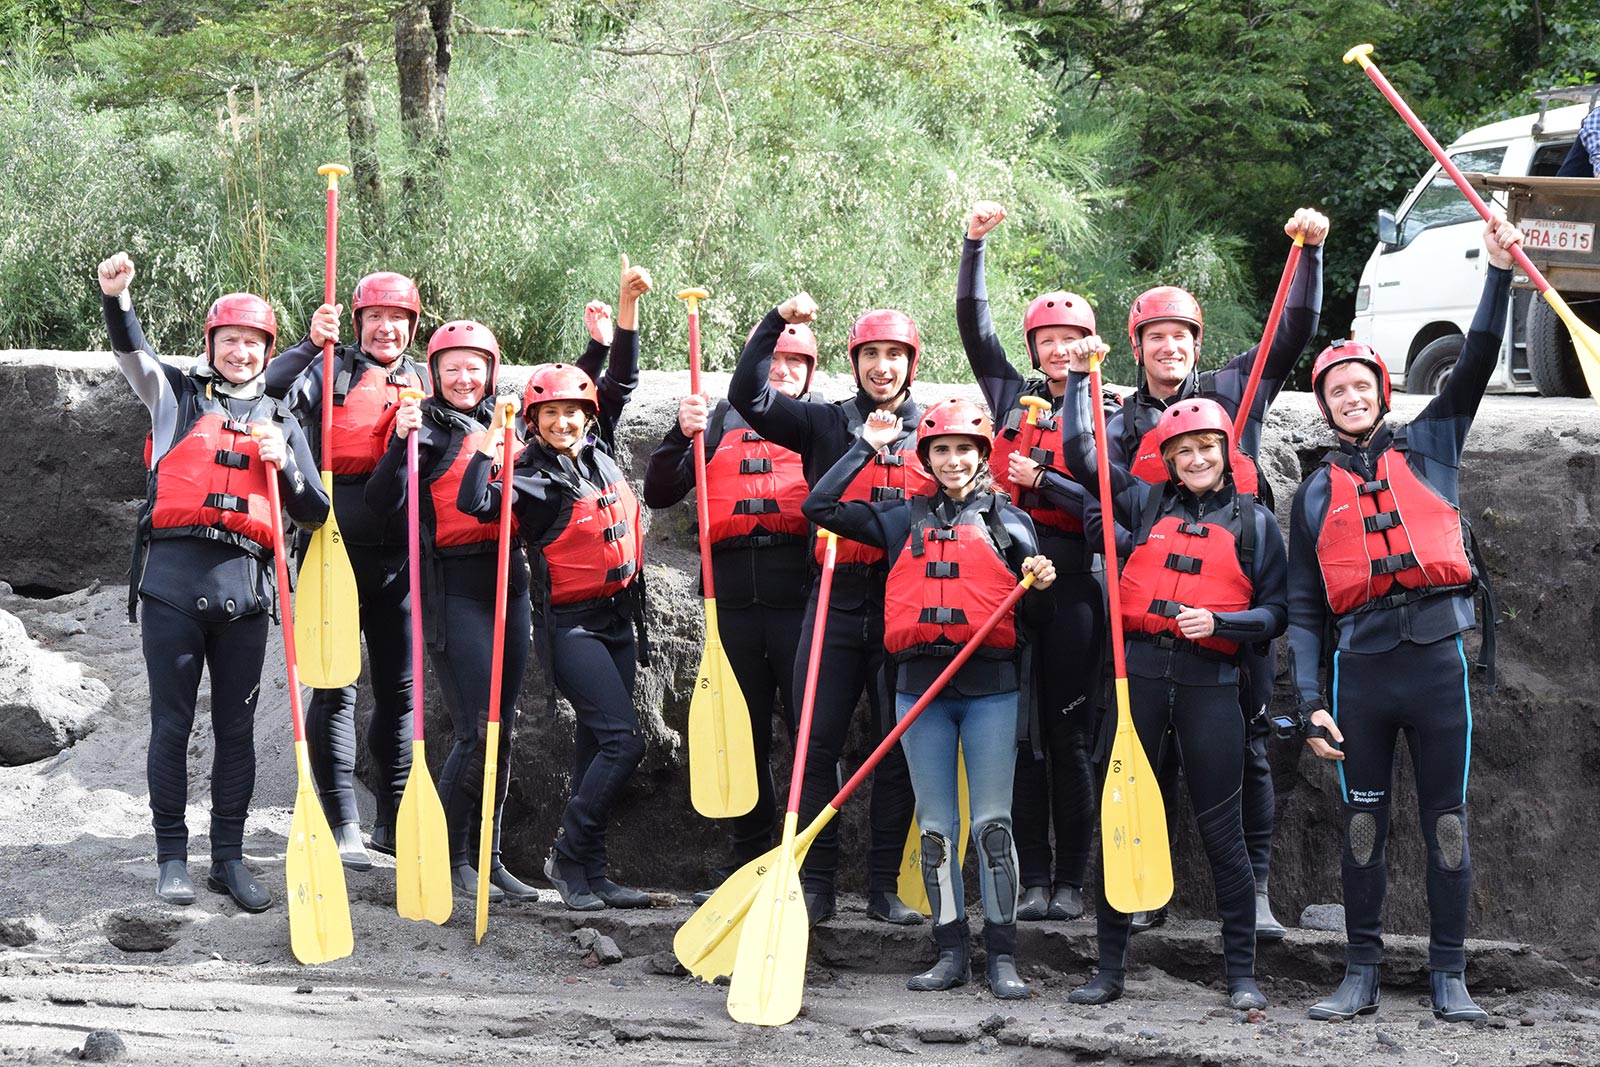 David Simpson, dad and fellow rafters on White Water rafting at Puerto Montt, Chile. Valparaiso & The Cruise to the end of the World pt3